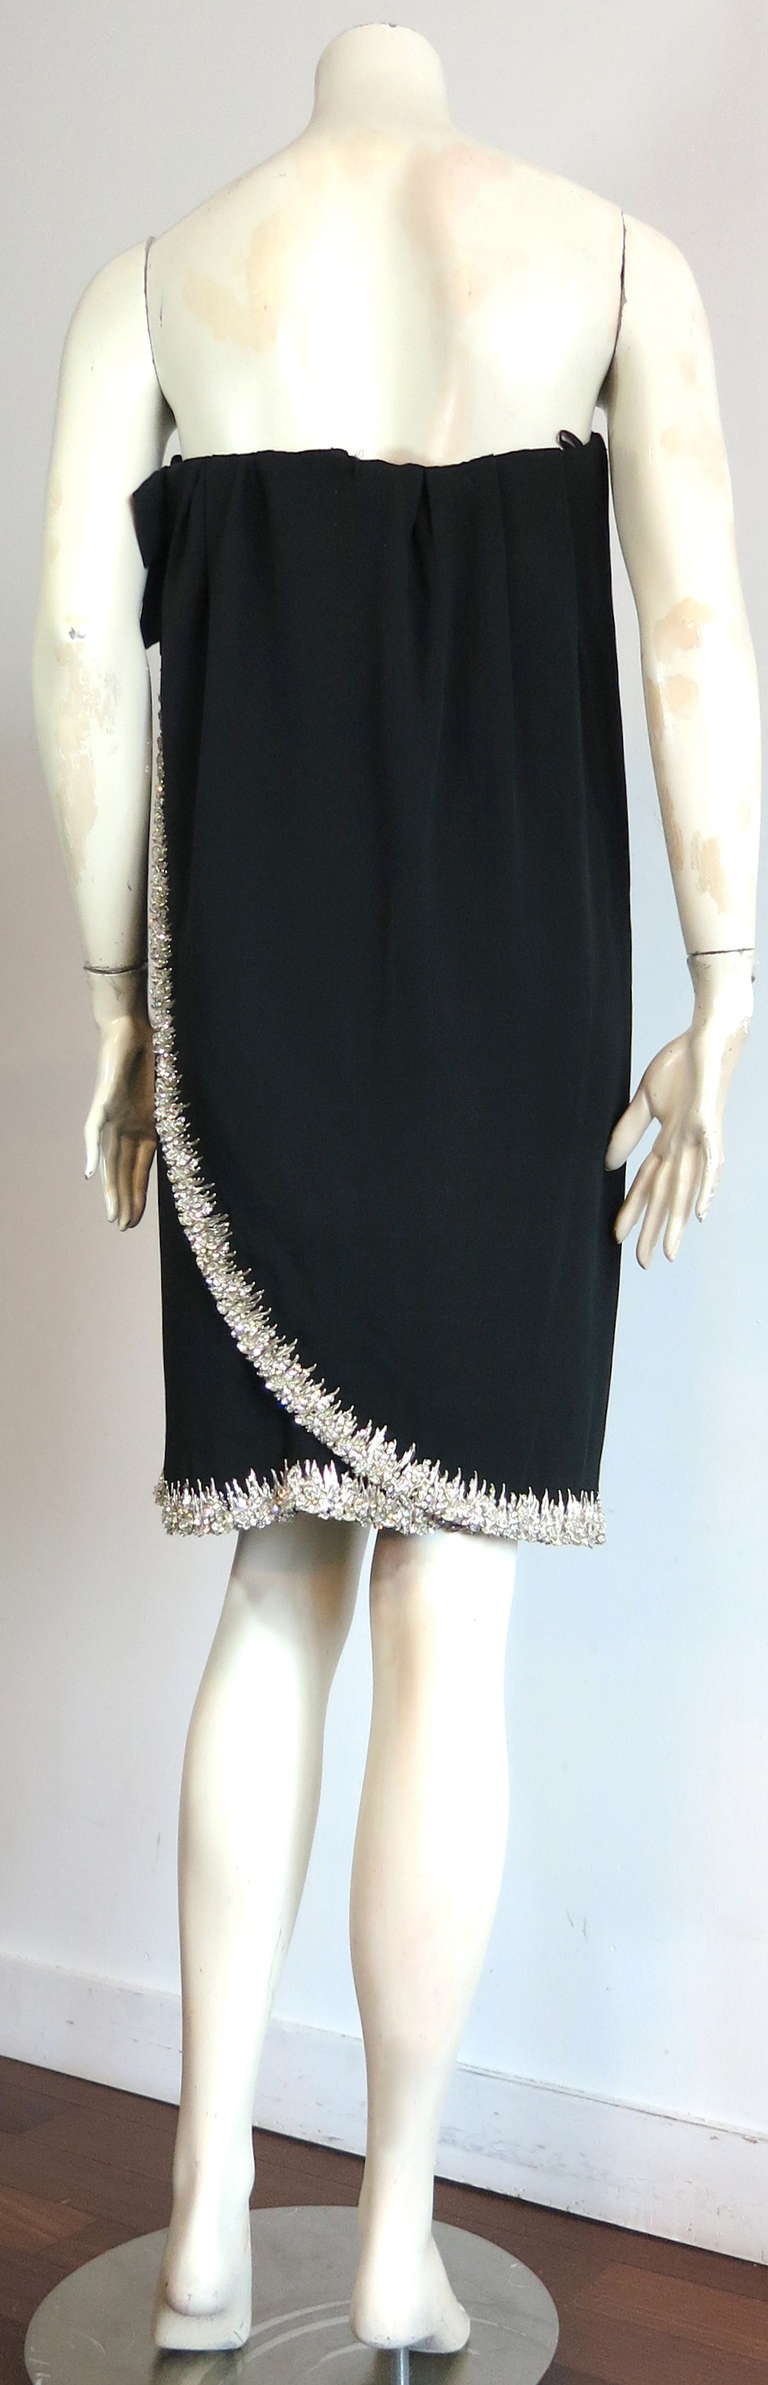 Women's 1965 CHRISTIAN DIOR Haute Couture Numbered black silk dress